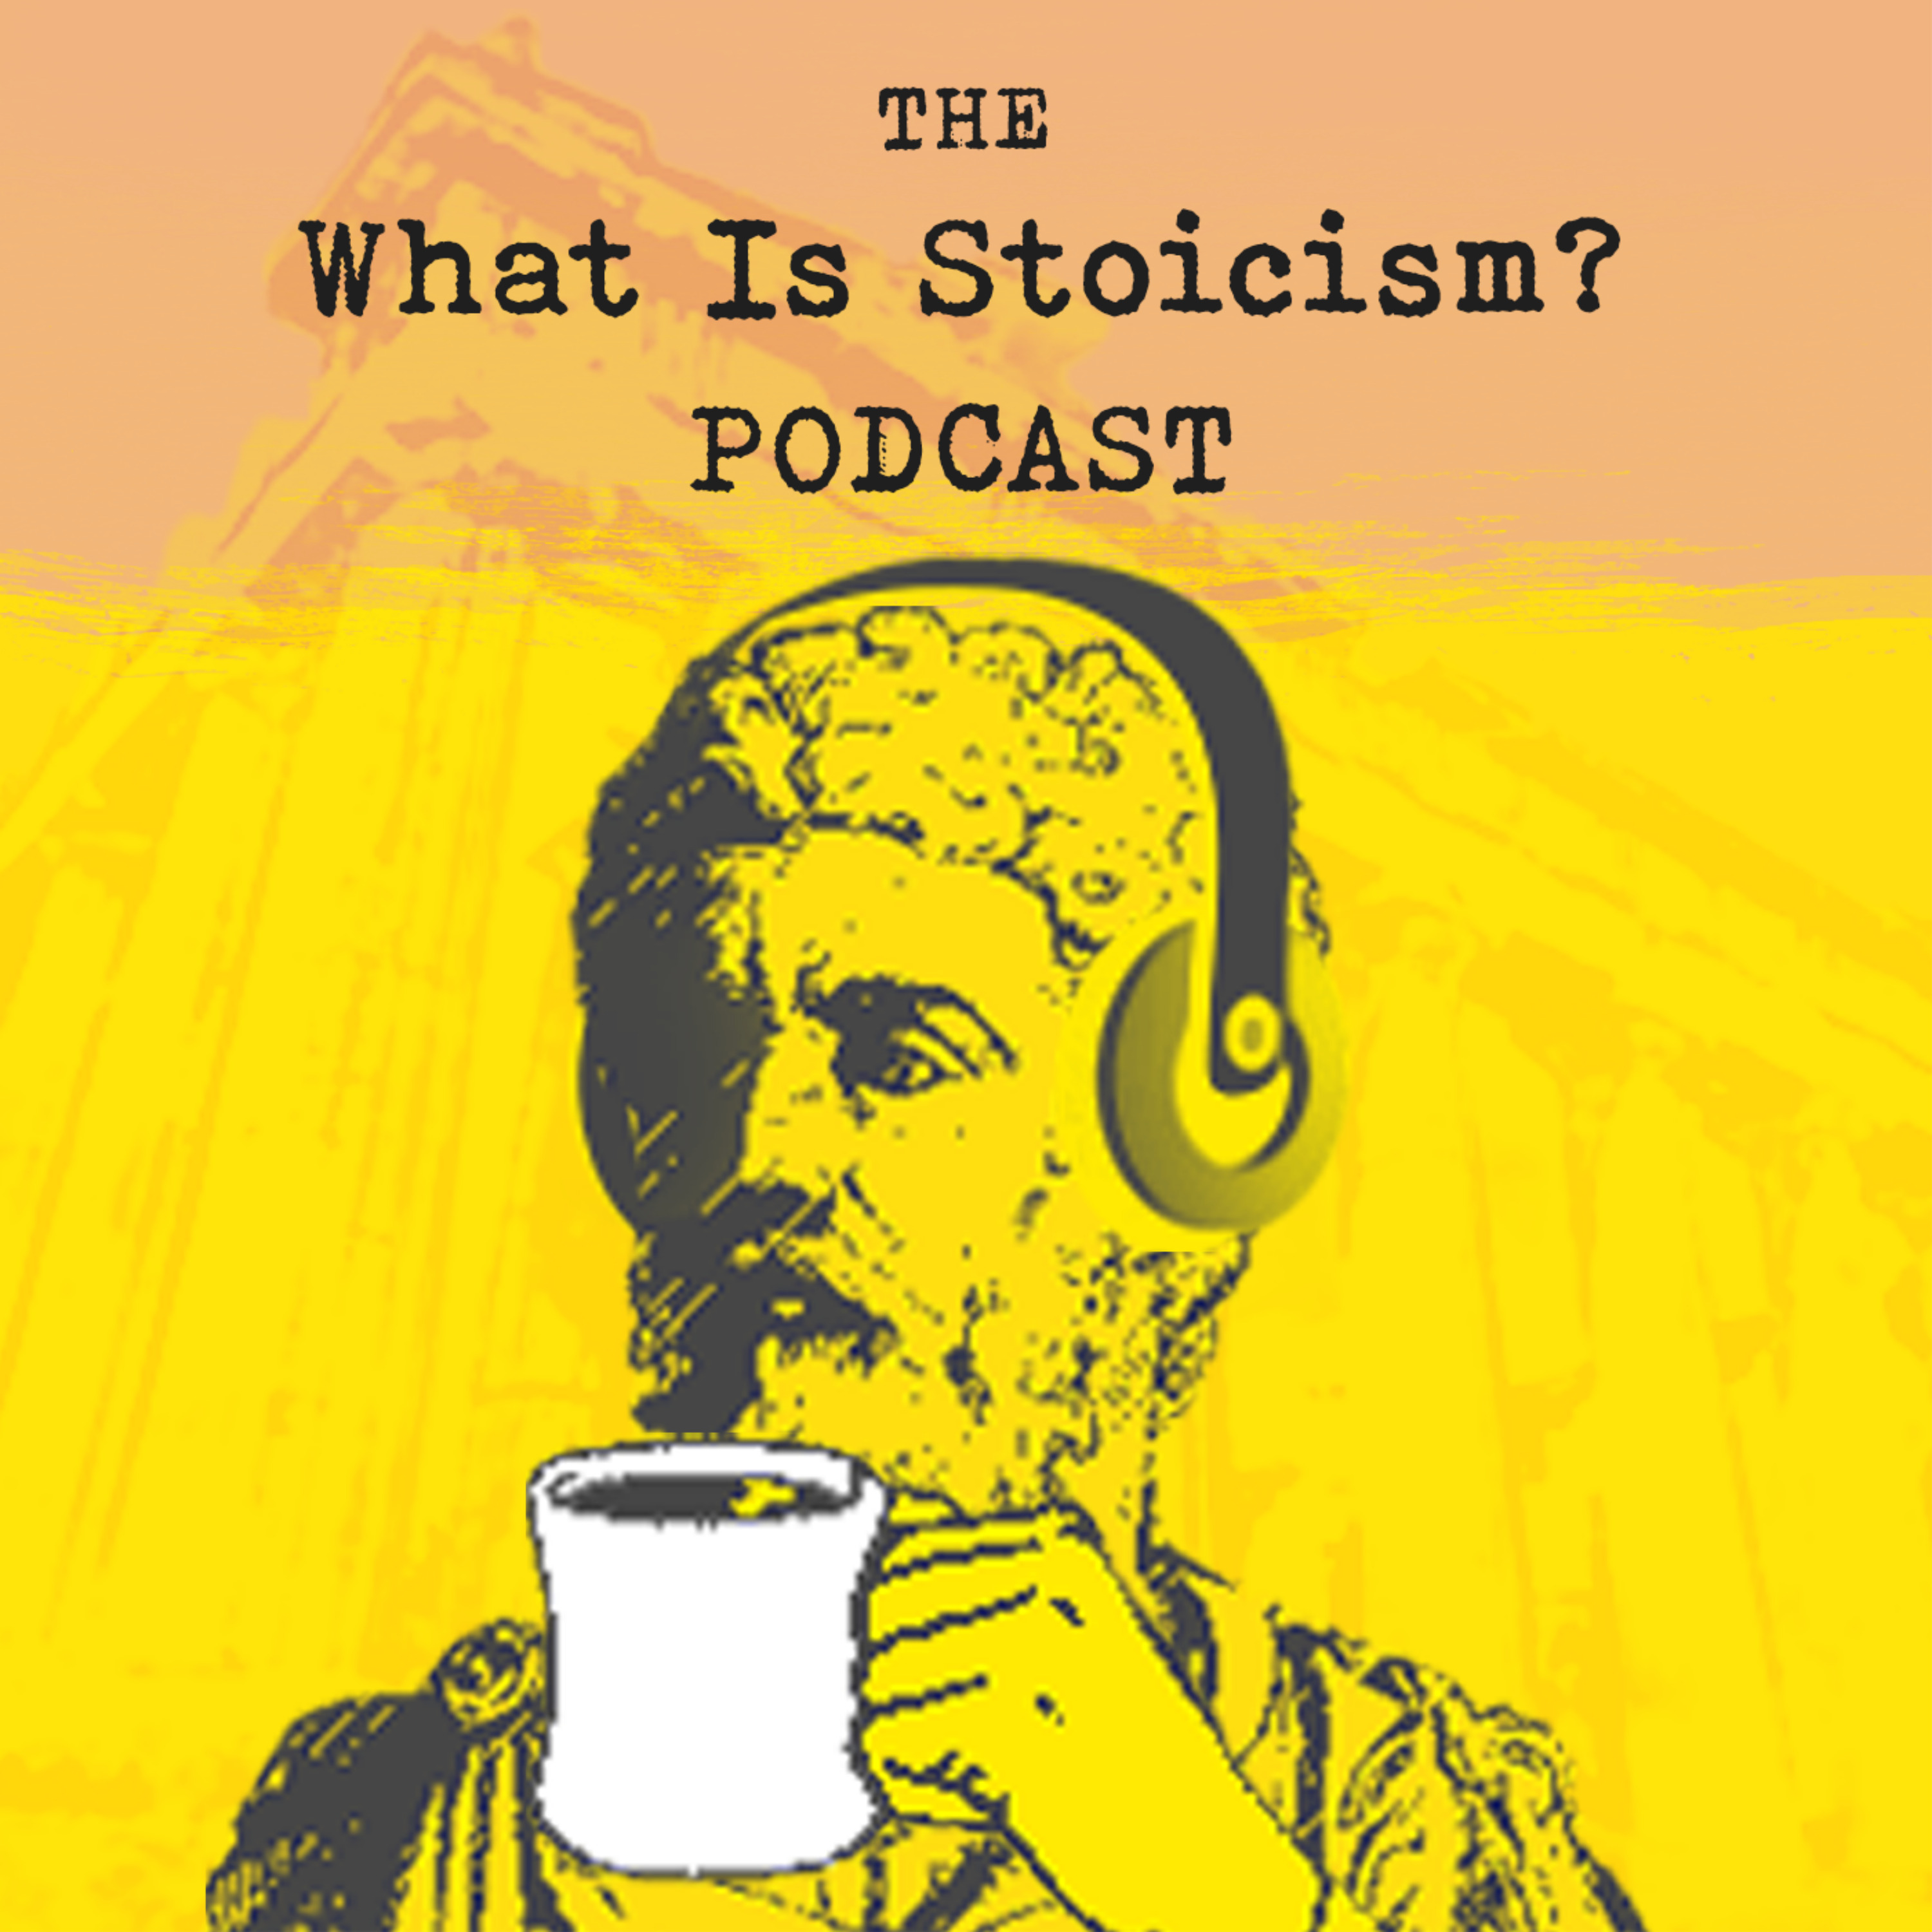 The What Is Stoicism? Podcast Image